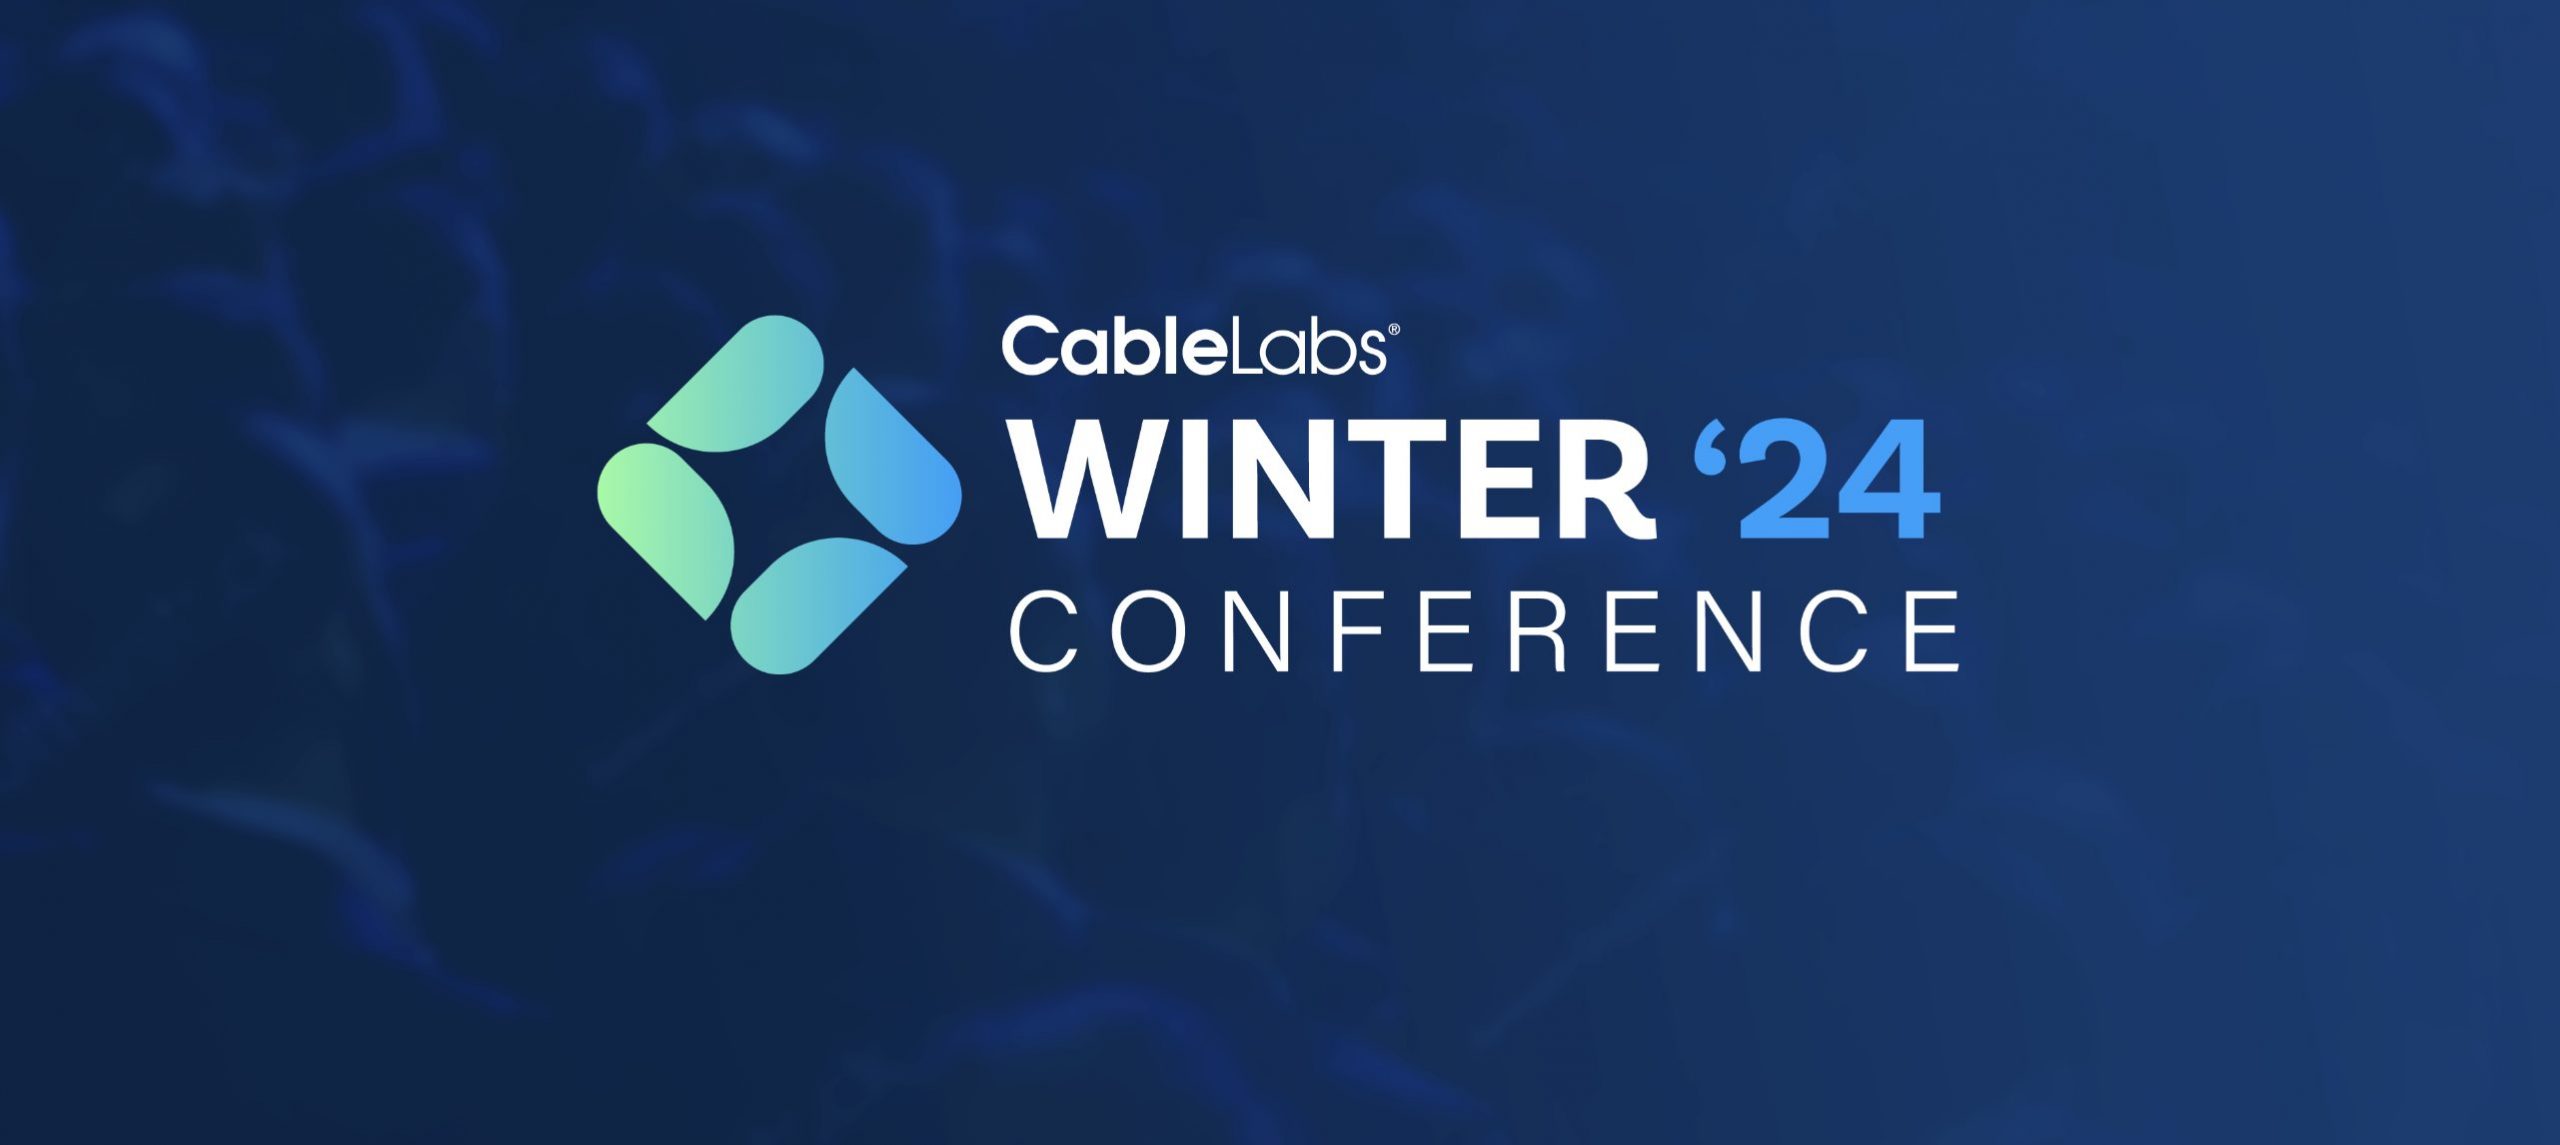 CableLabs Winter Conference scaled